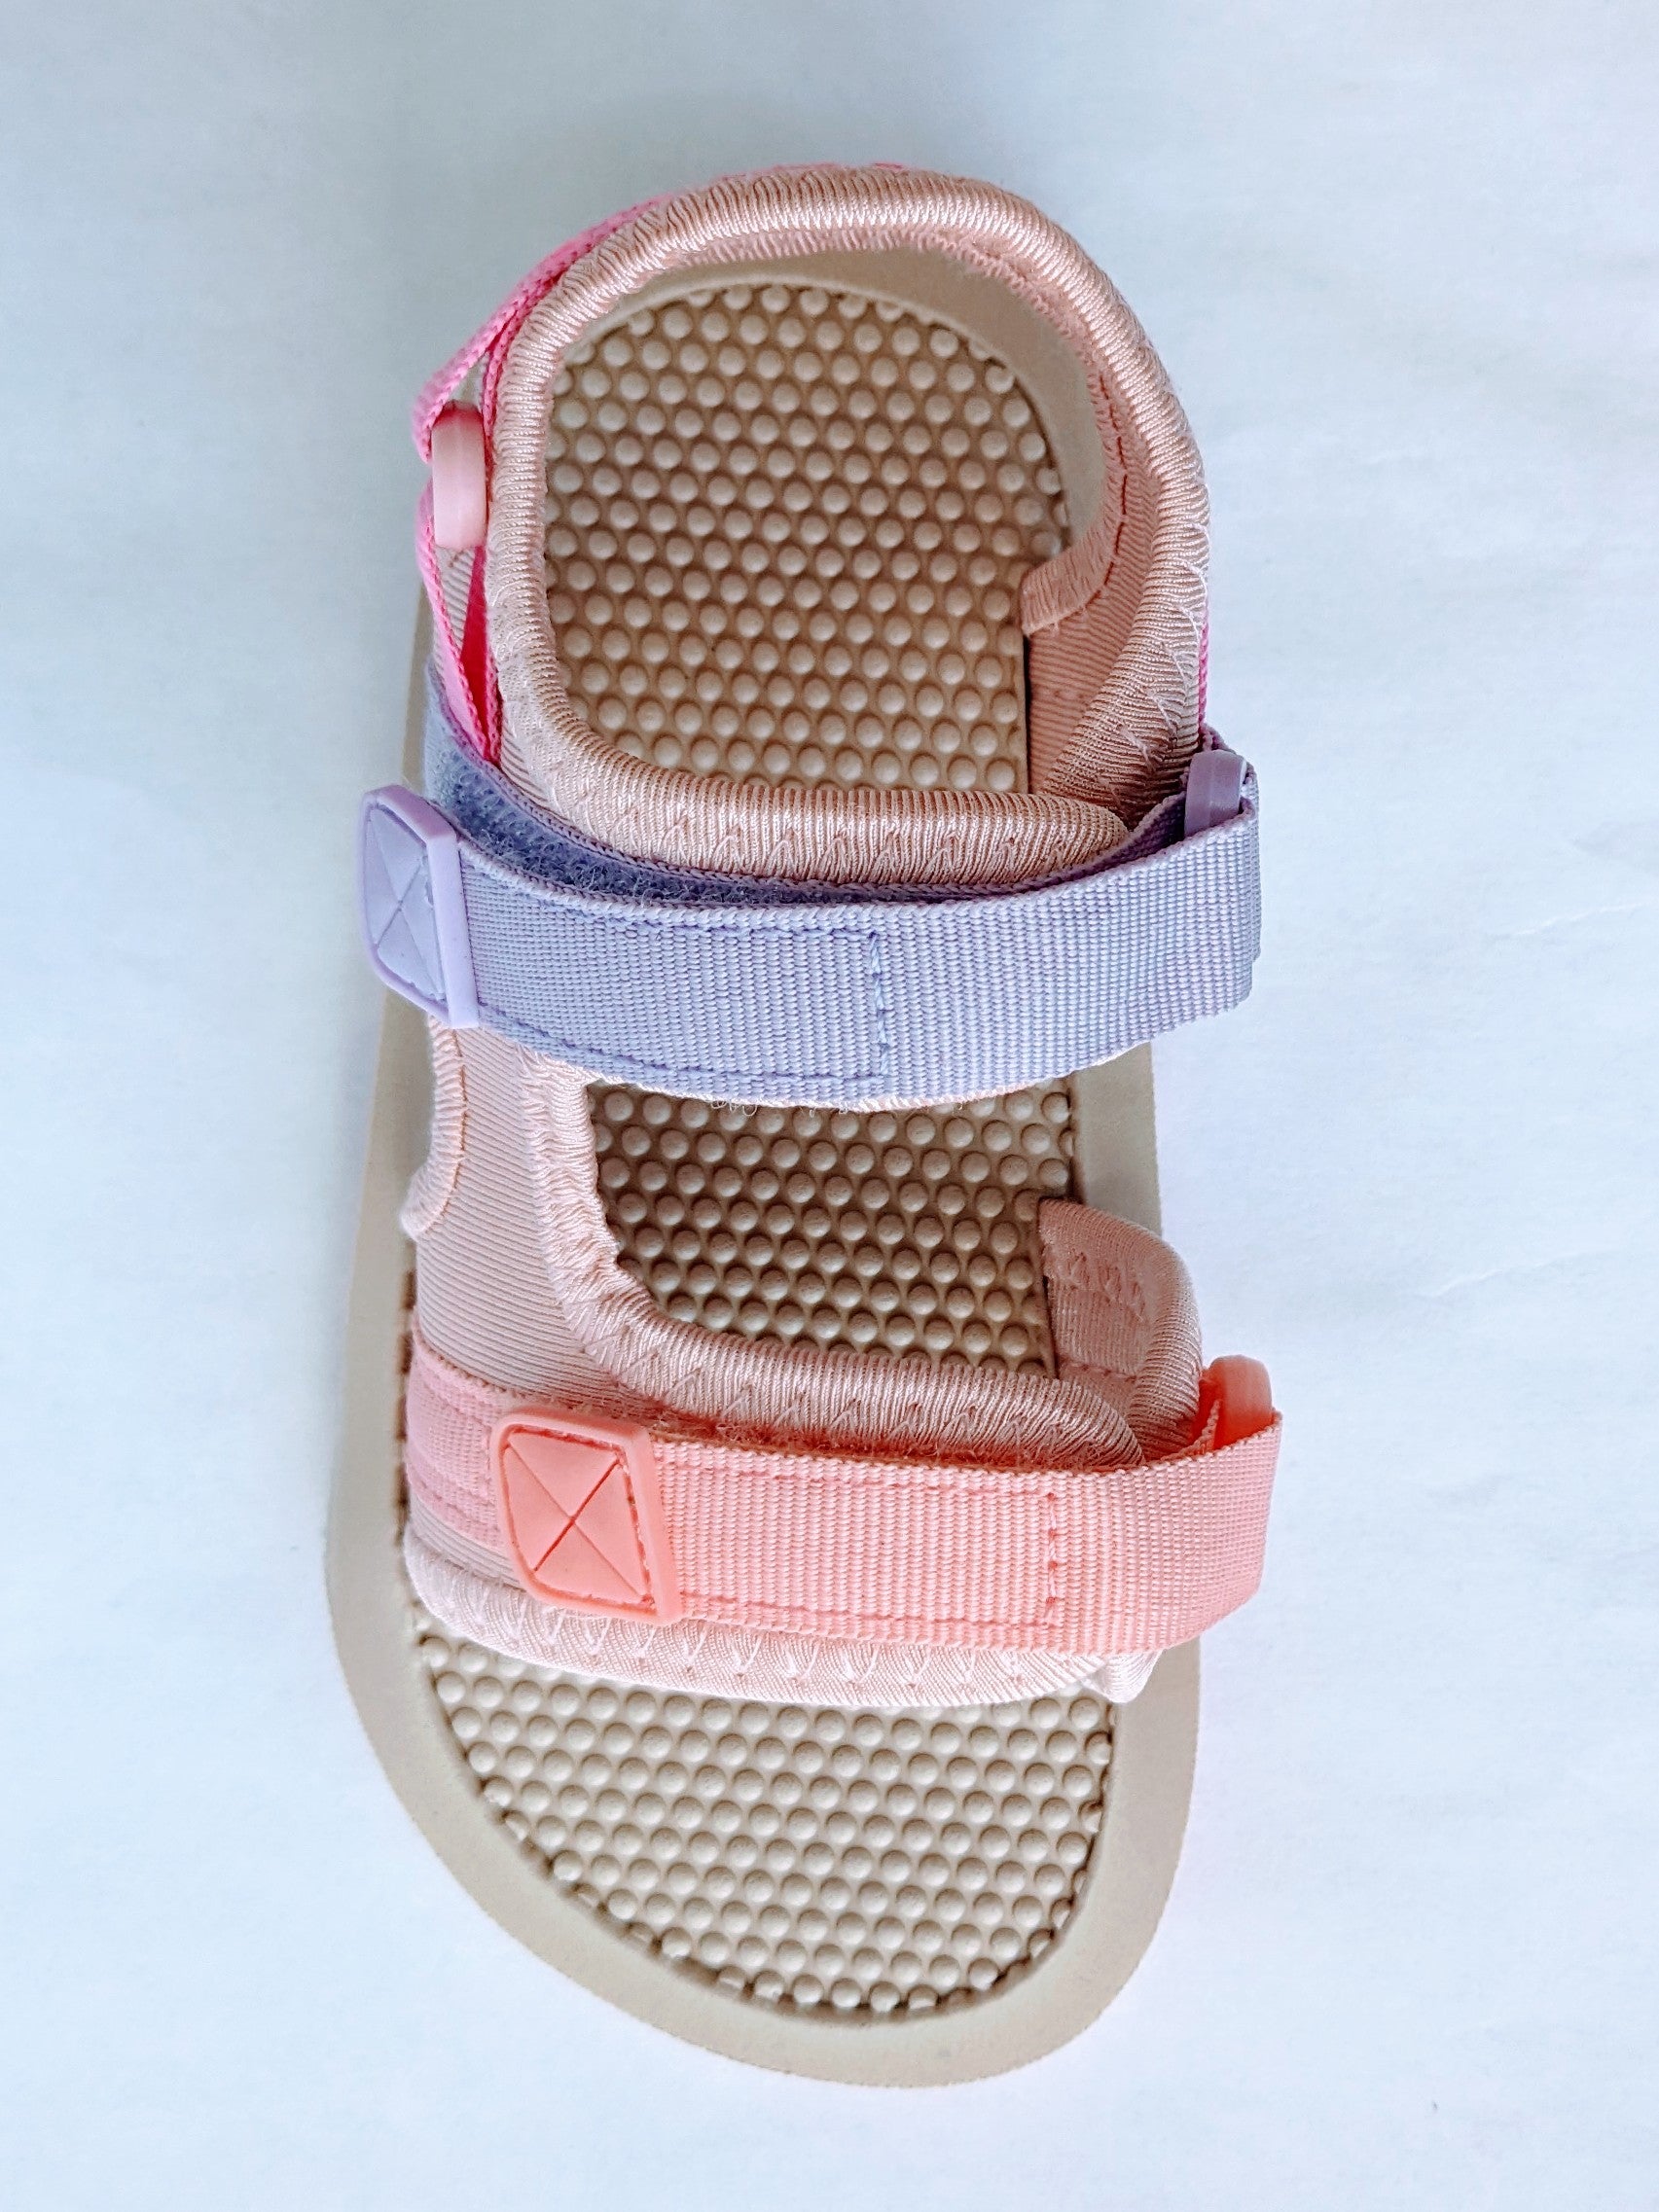 A girls open toe sandal by Shoesme, style LS23S001-A, in pink/lilac multi fabric with velcro fastening. Top view.